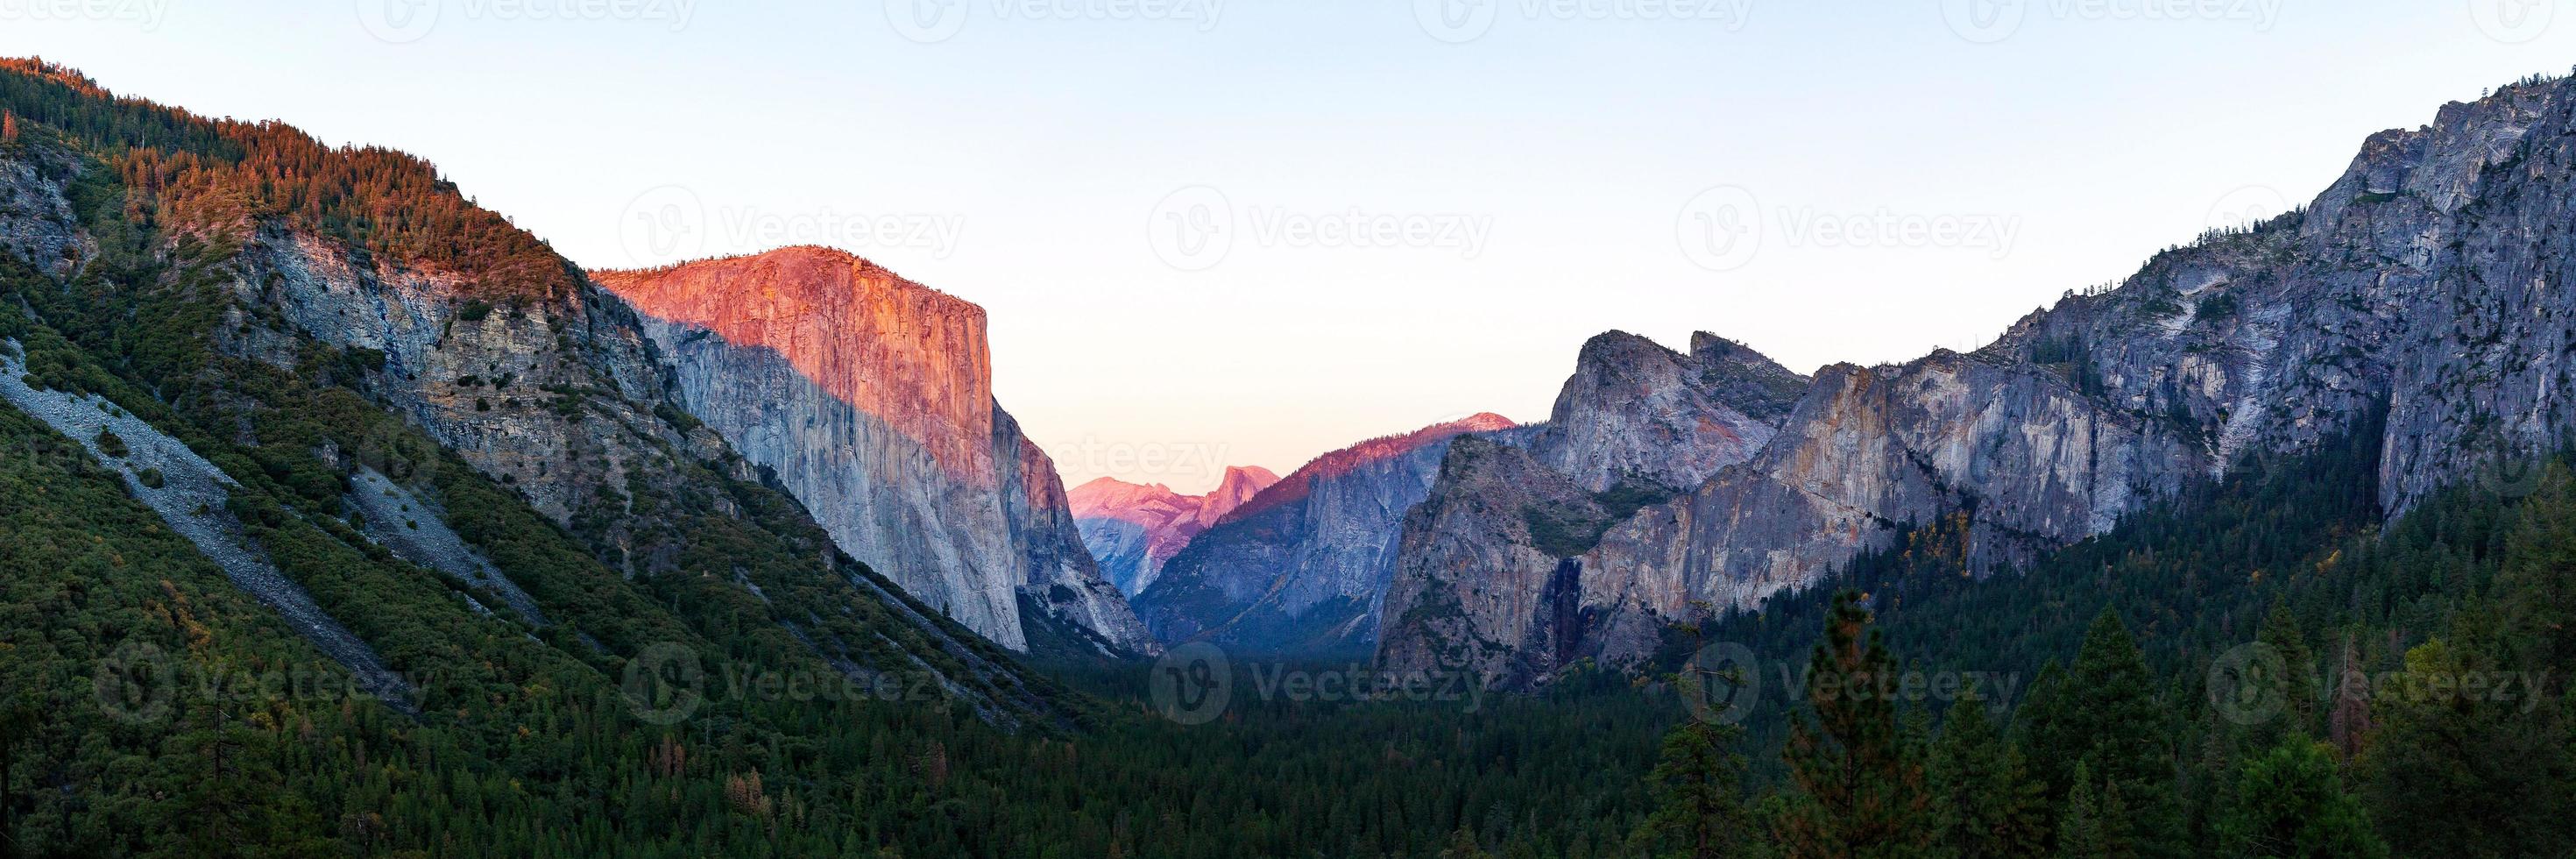 Yosemite valley nation park during sunset view from tunnel view on twilight time. photo